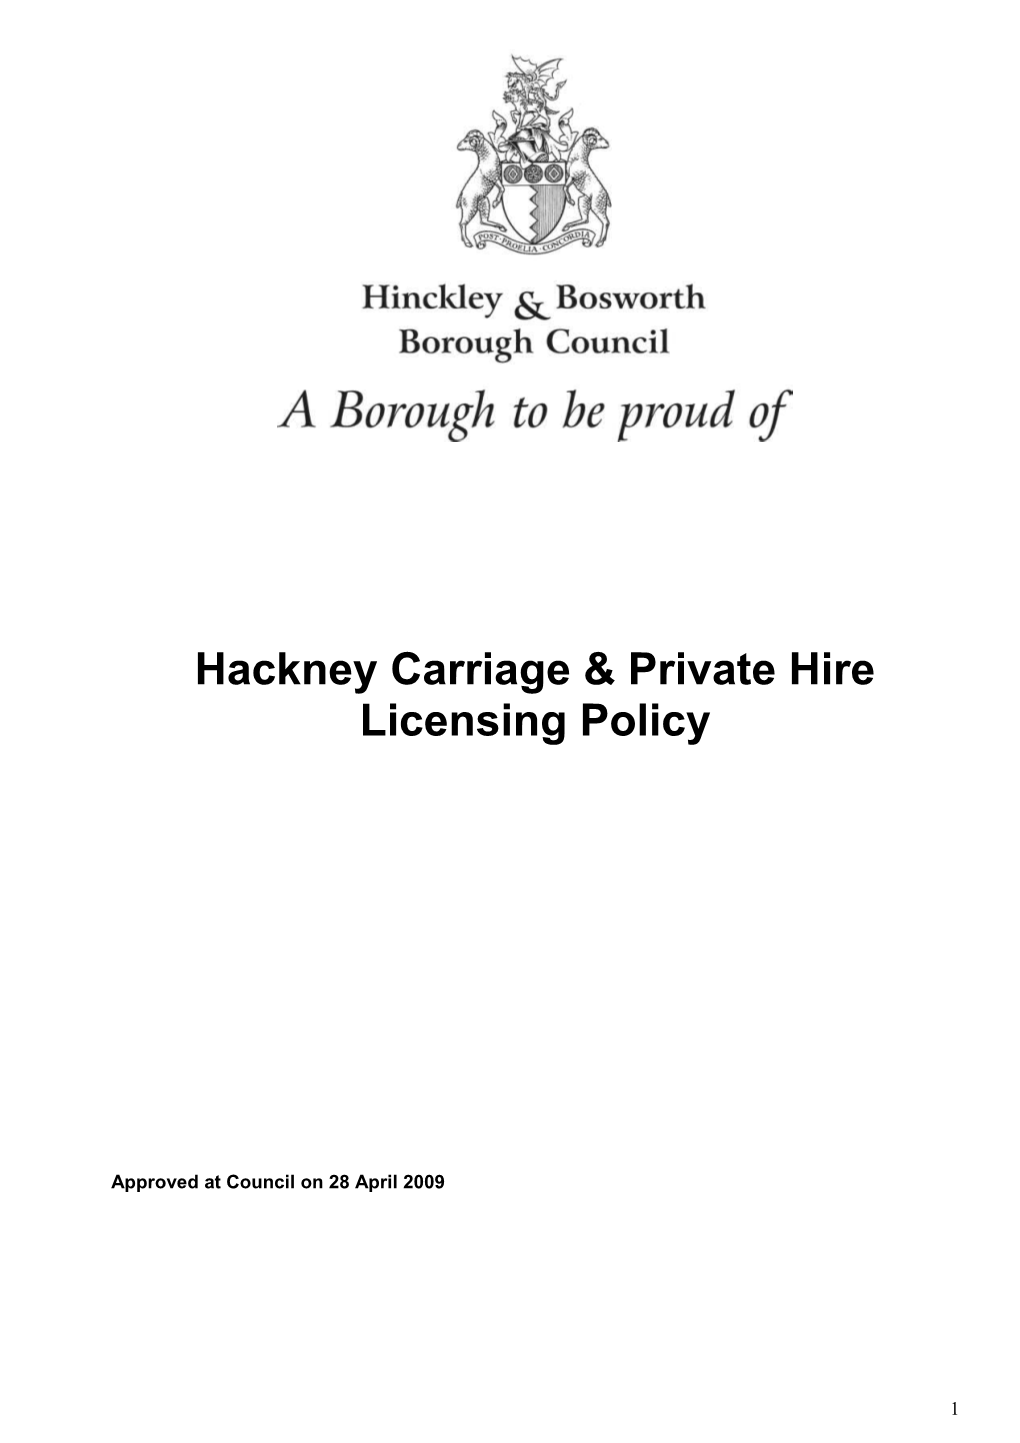 Hackney Carriage & Private Hire Licensing Policy